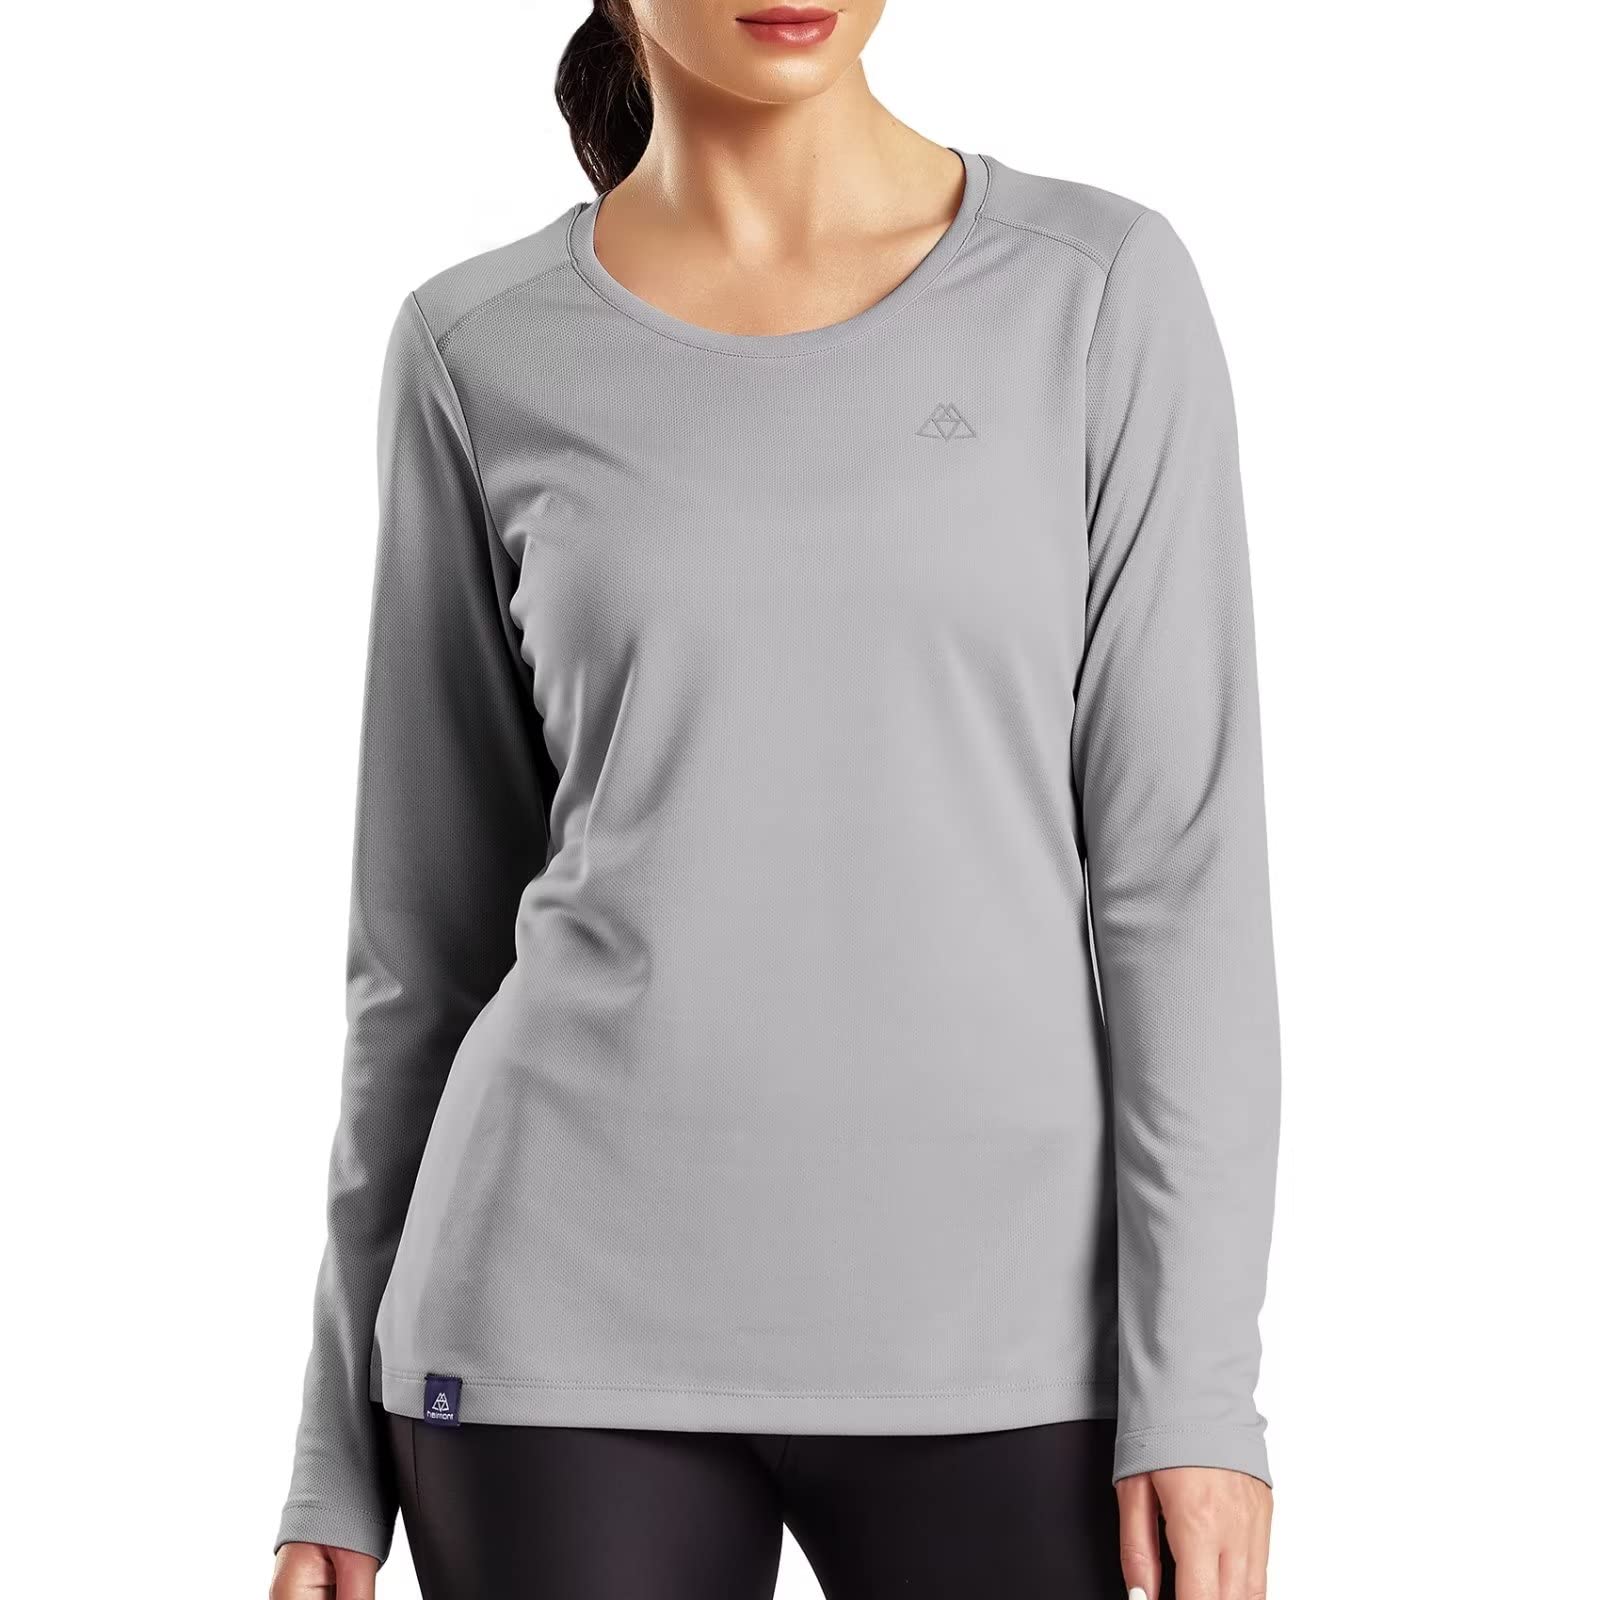 Haimont Women's Athletic T-Shirts Long Sleeve Active Tops